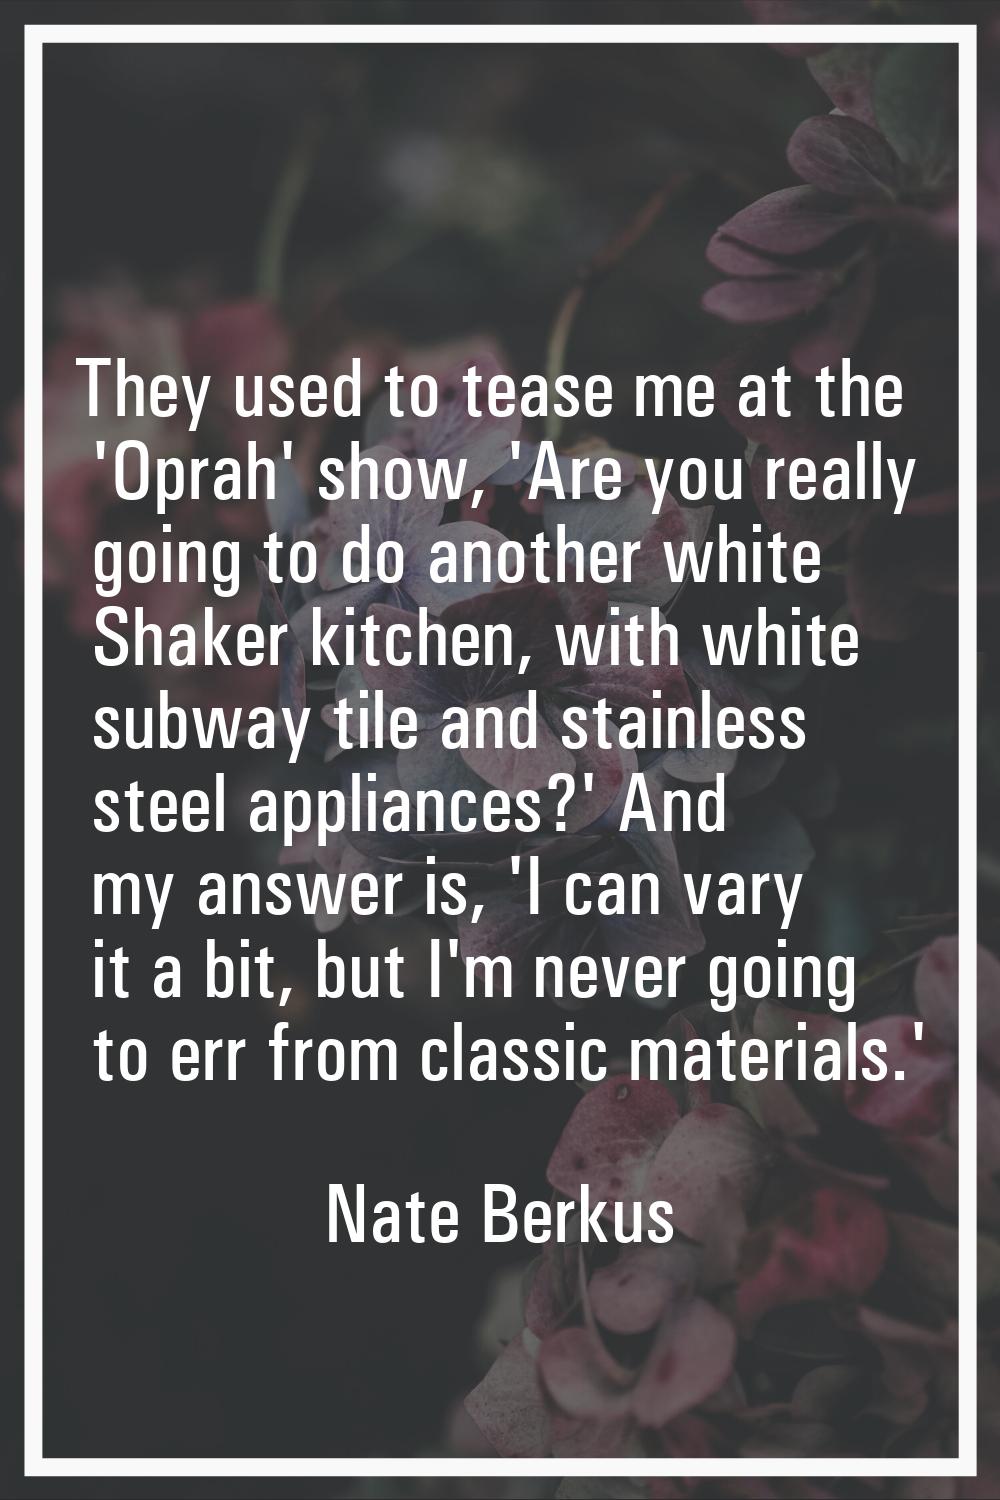 They used to tease me at the 'Oprah' show, 'Are you really going to do another white Shaker kitchen